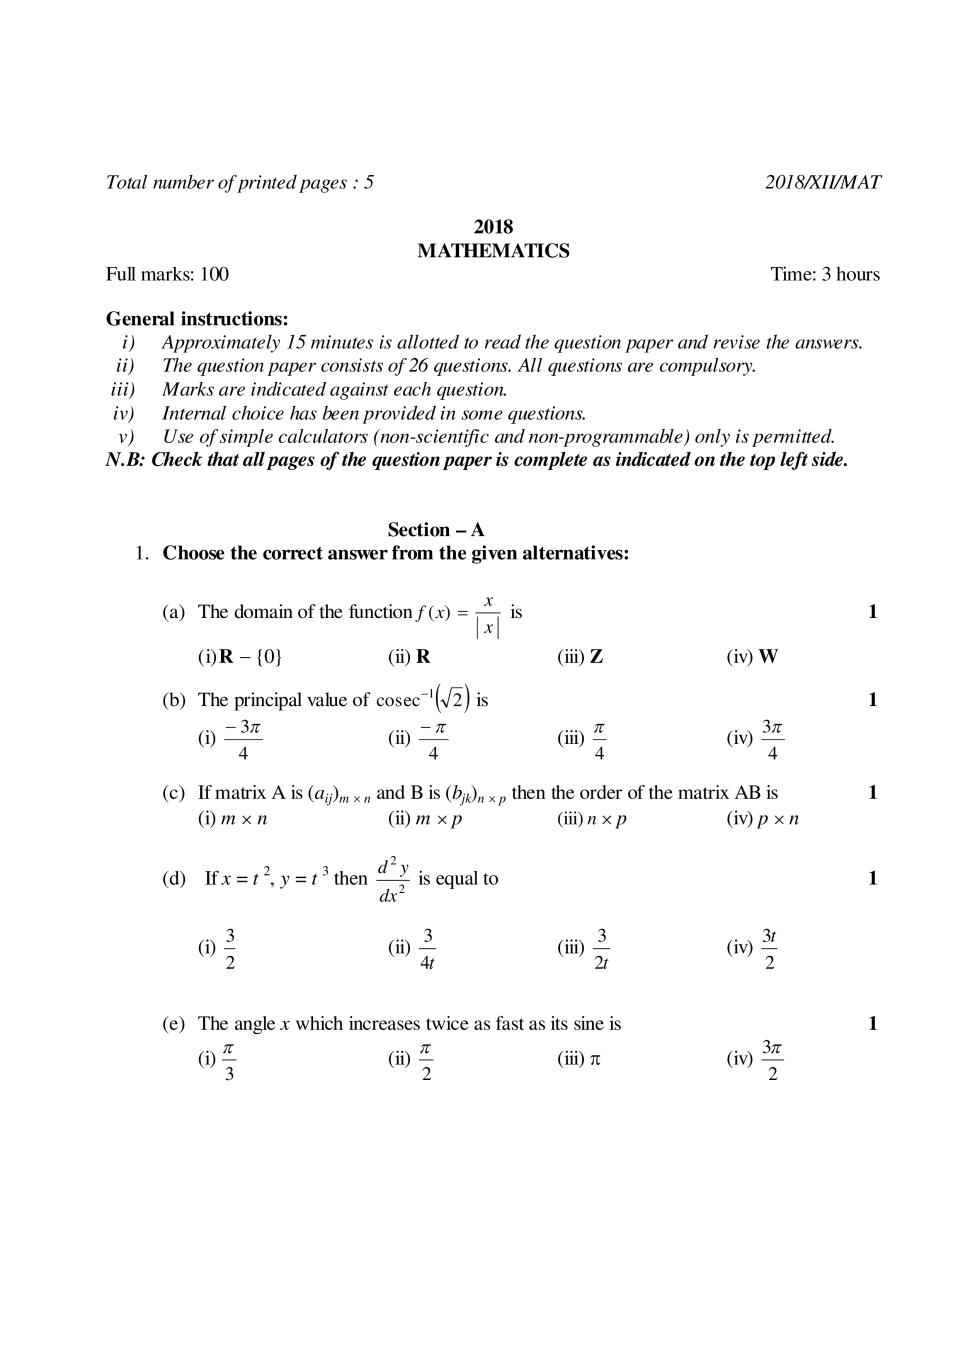 NBSE Class 12 Question Paper 2018 for Maths - Page 1